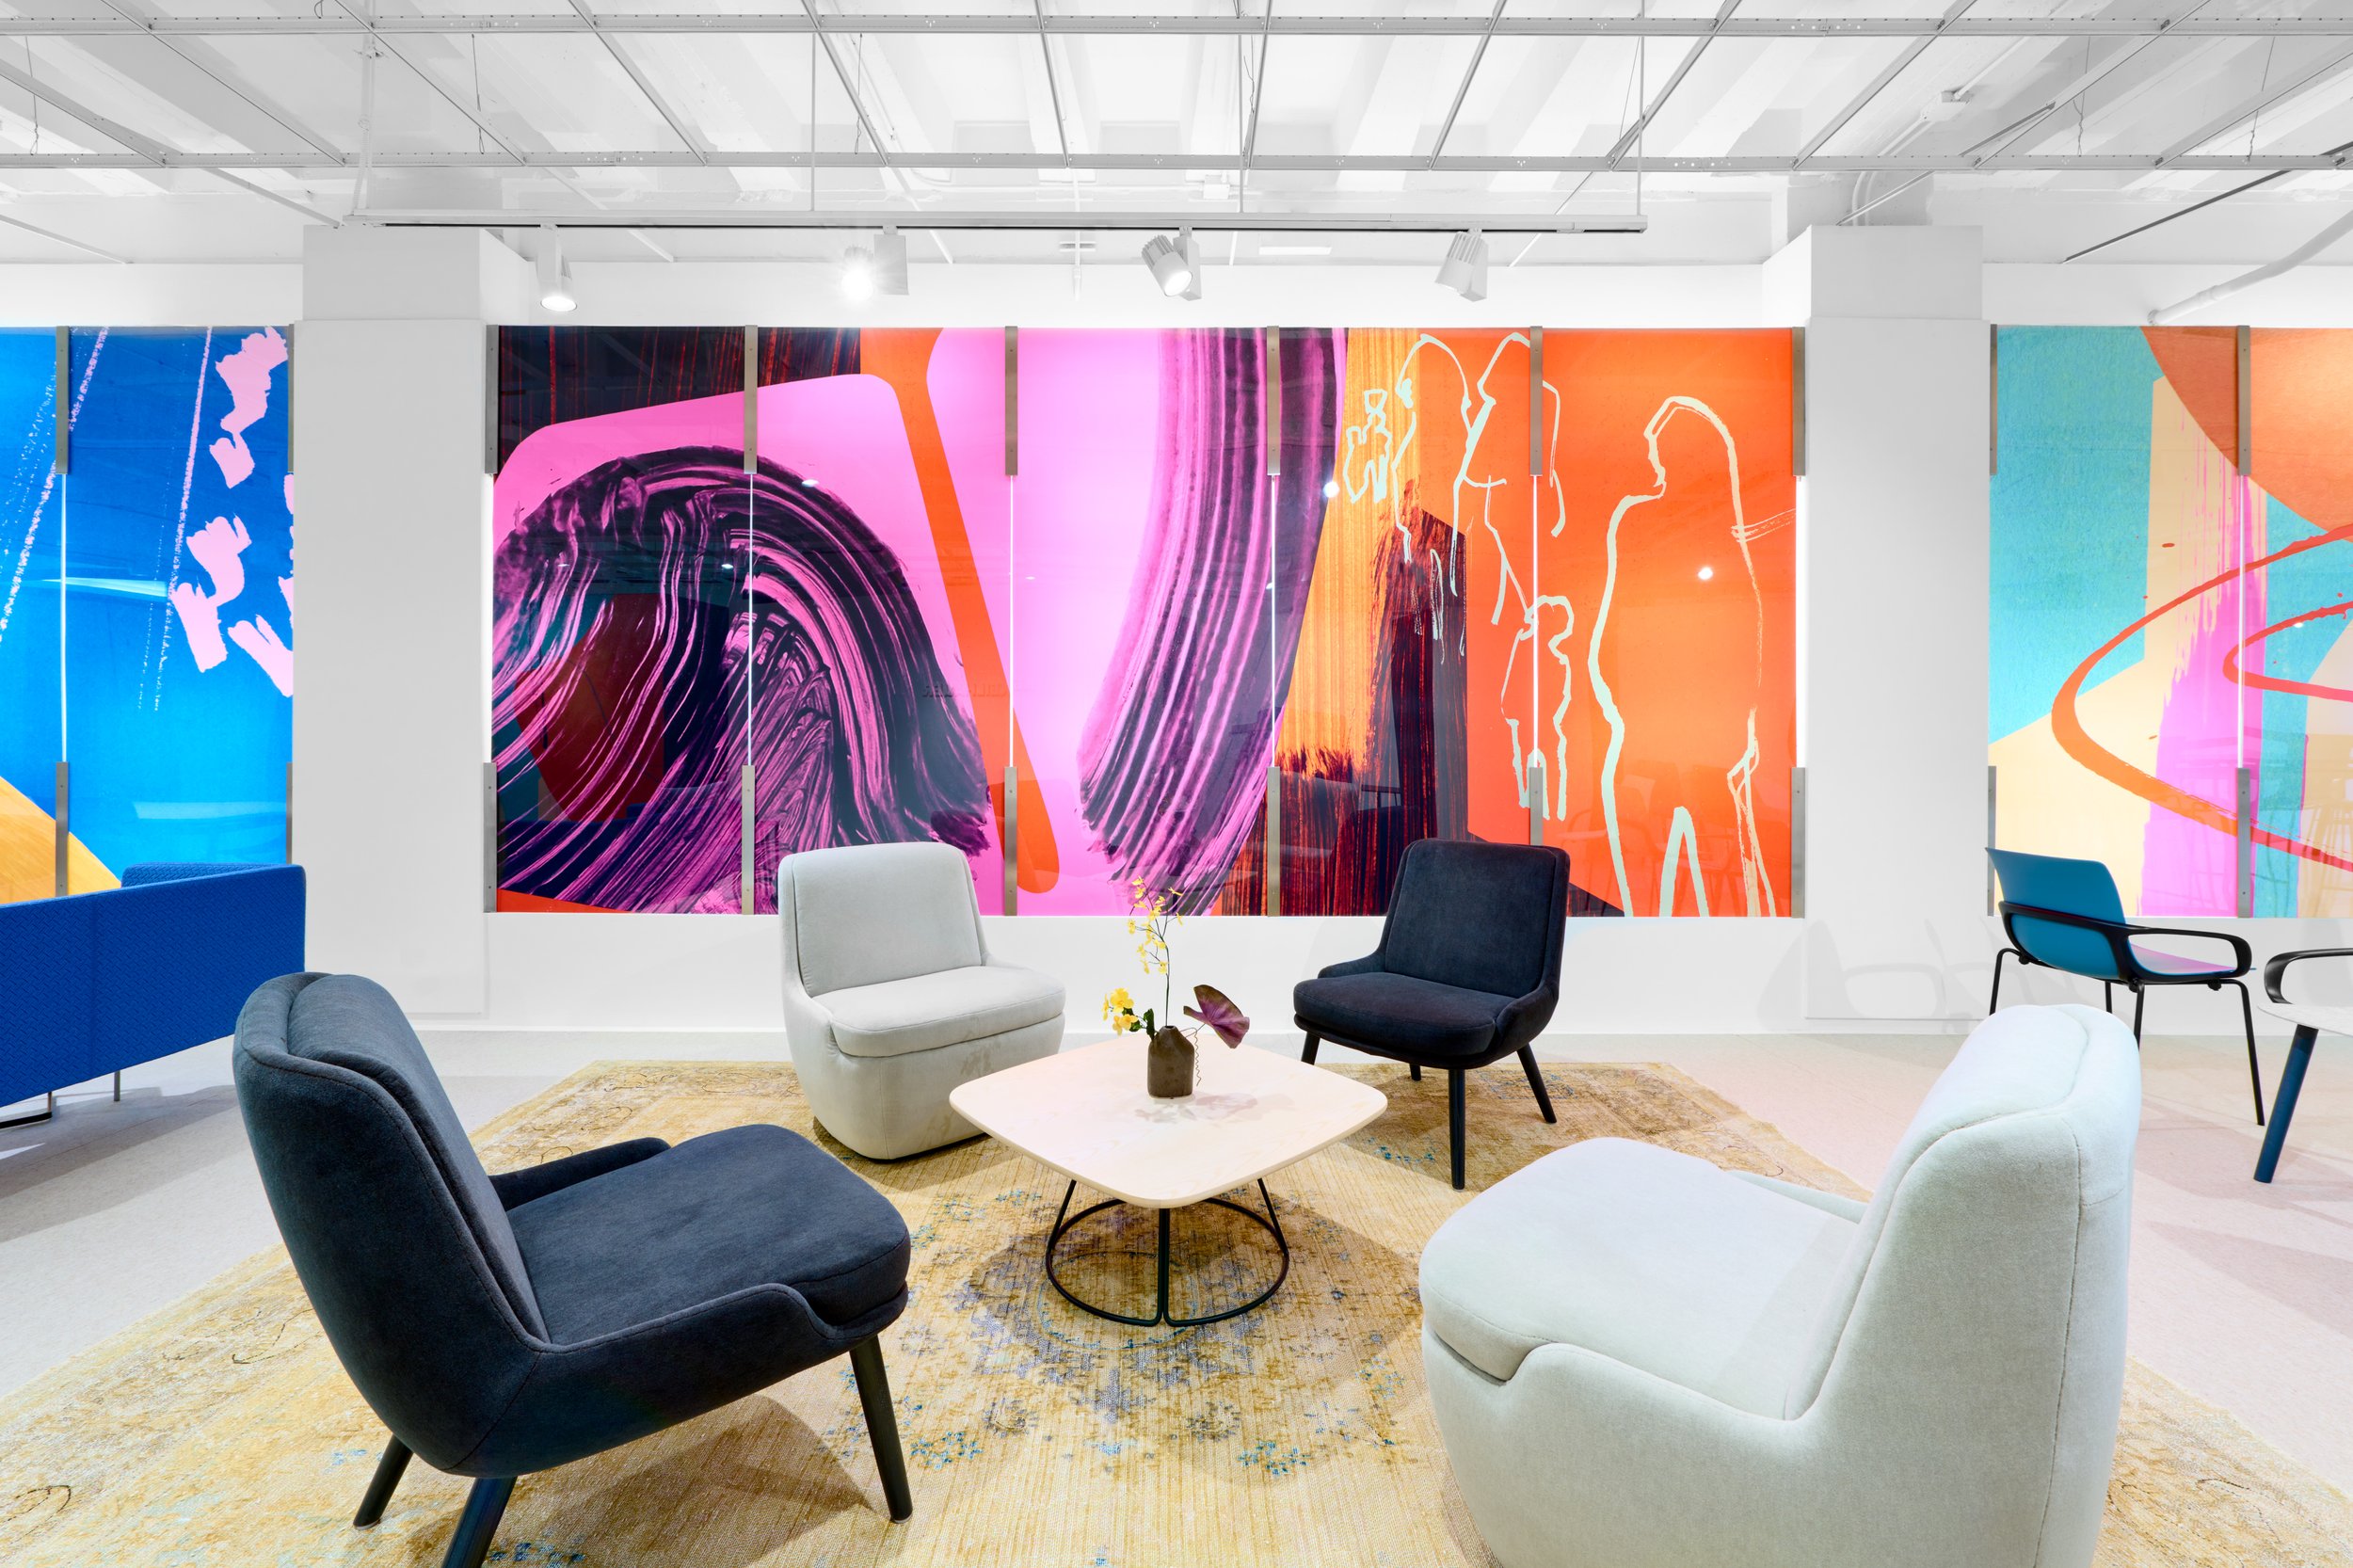 Keilhauer showroom photography at the Merchandise Mart in Chicago, IL